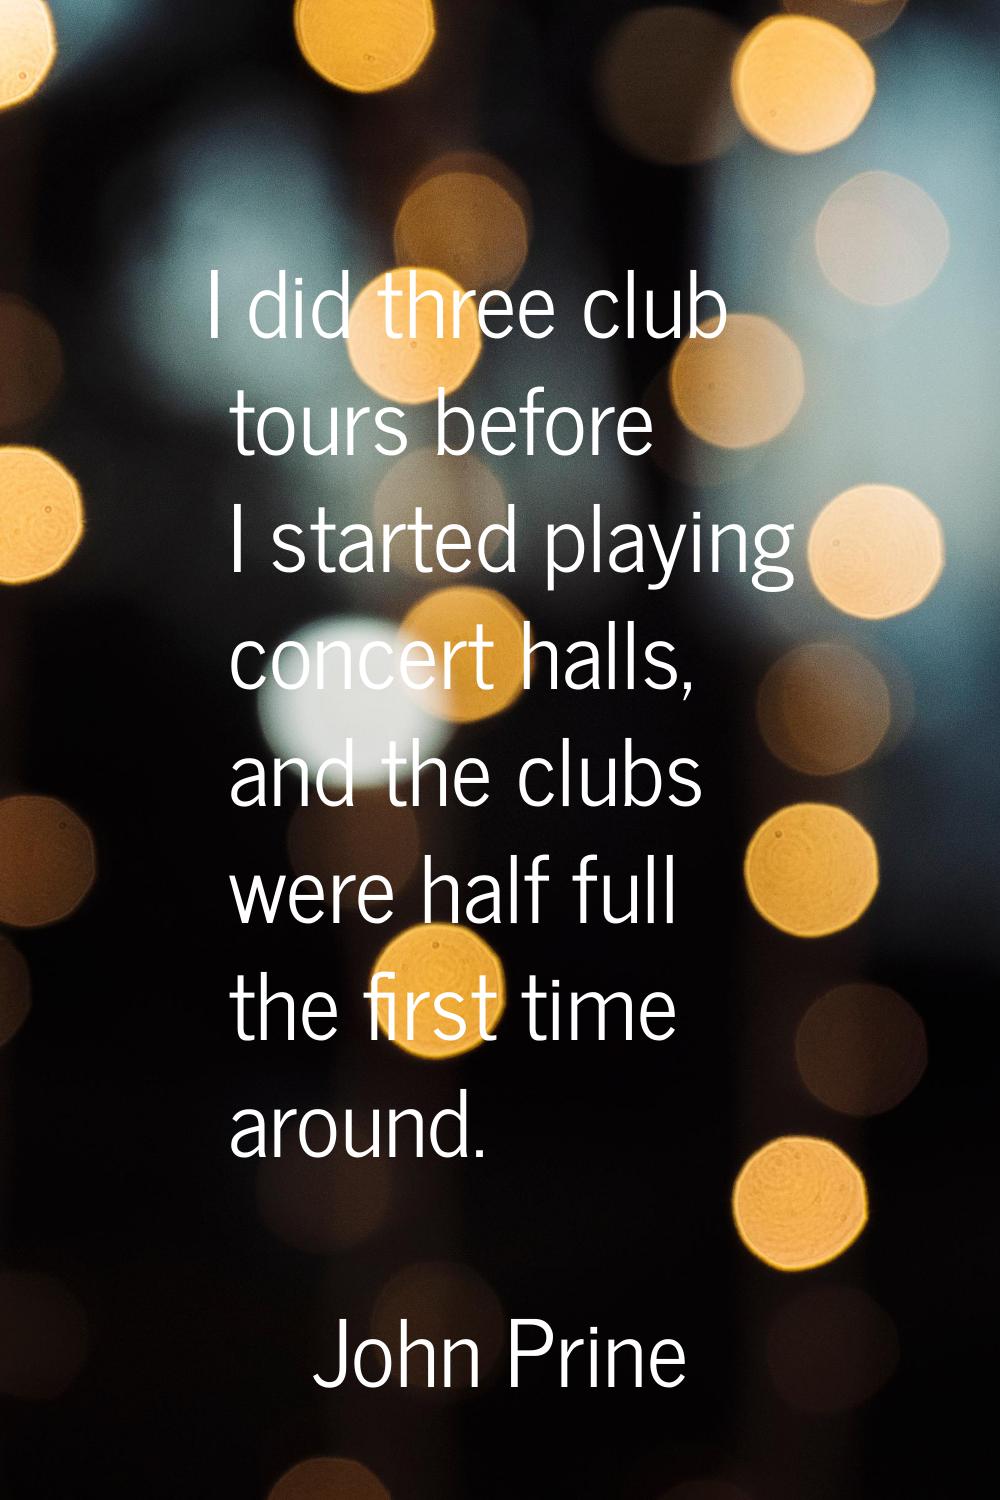 I did three club tours before I started playing concert halls, and the clubs were half full the fir